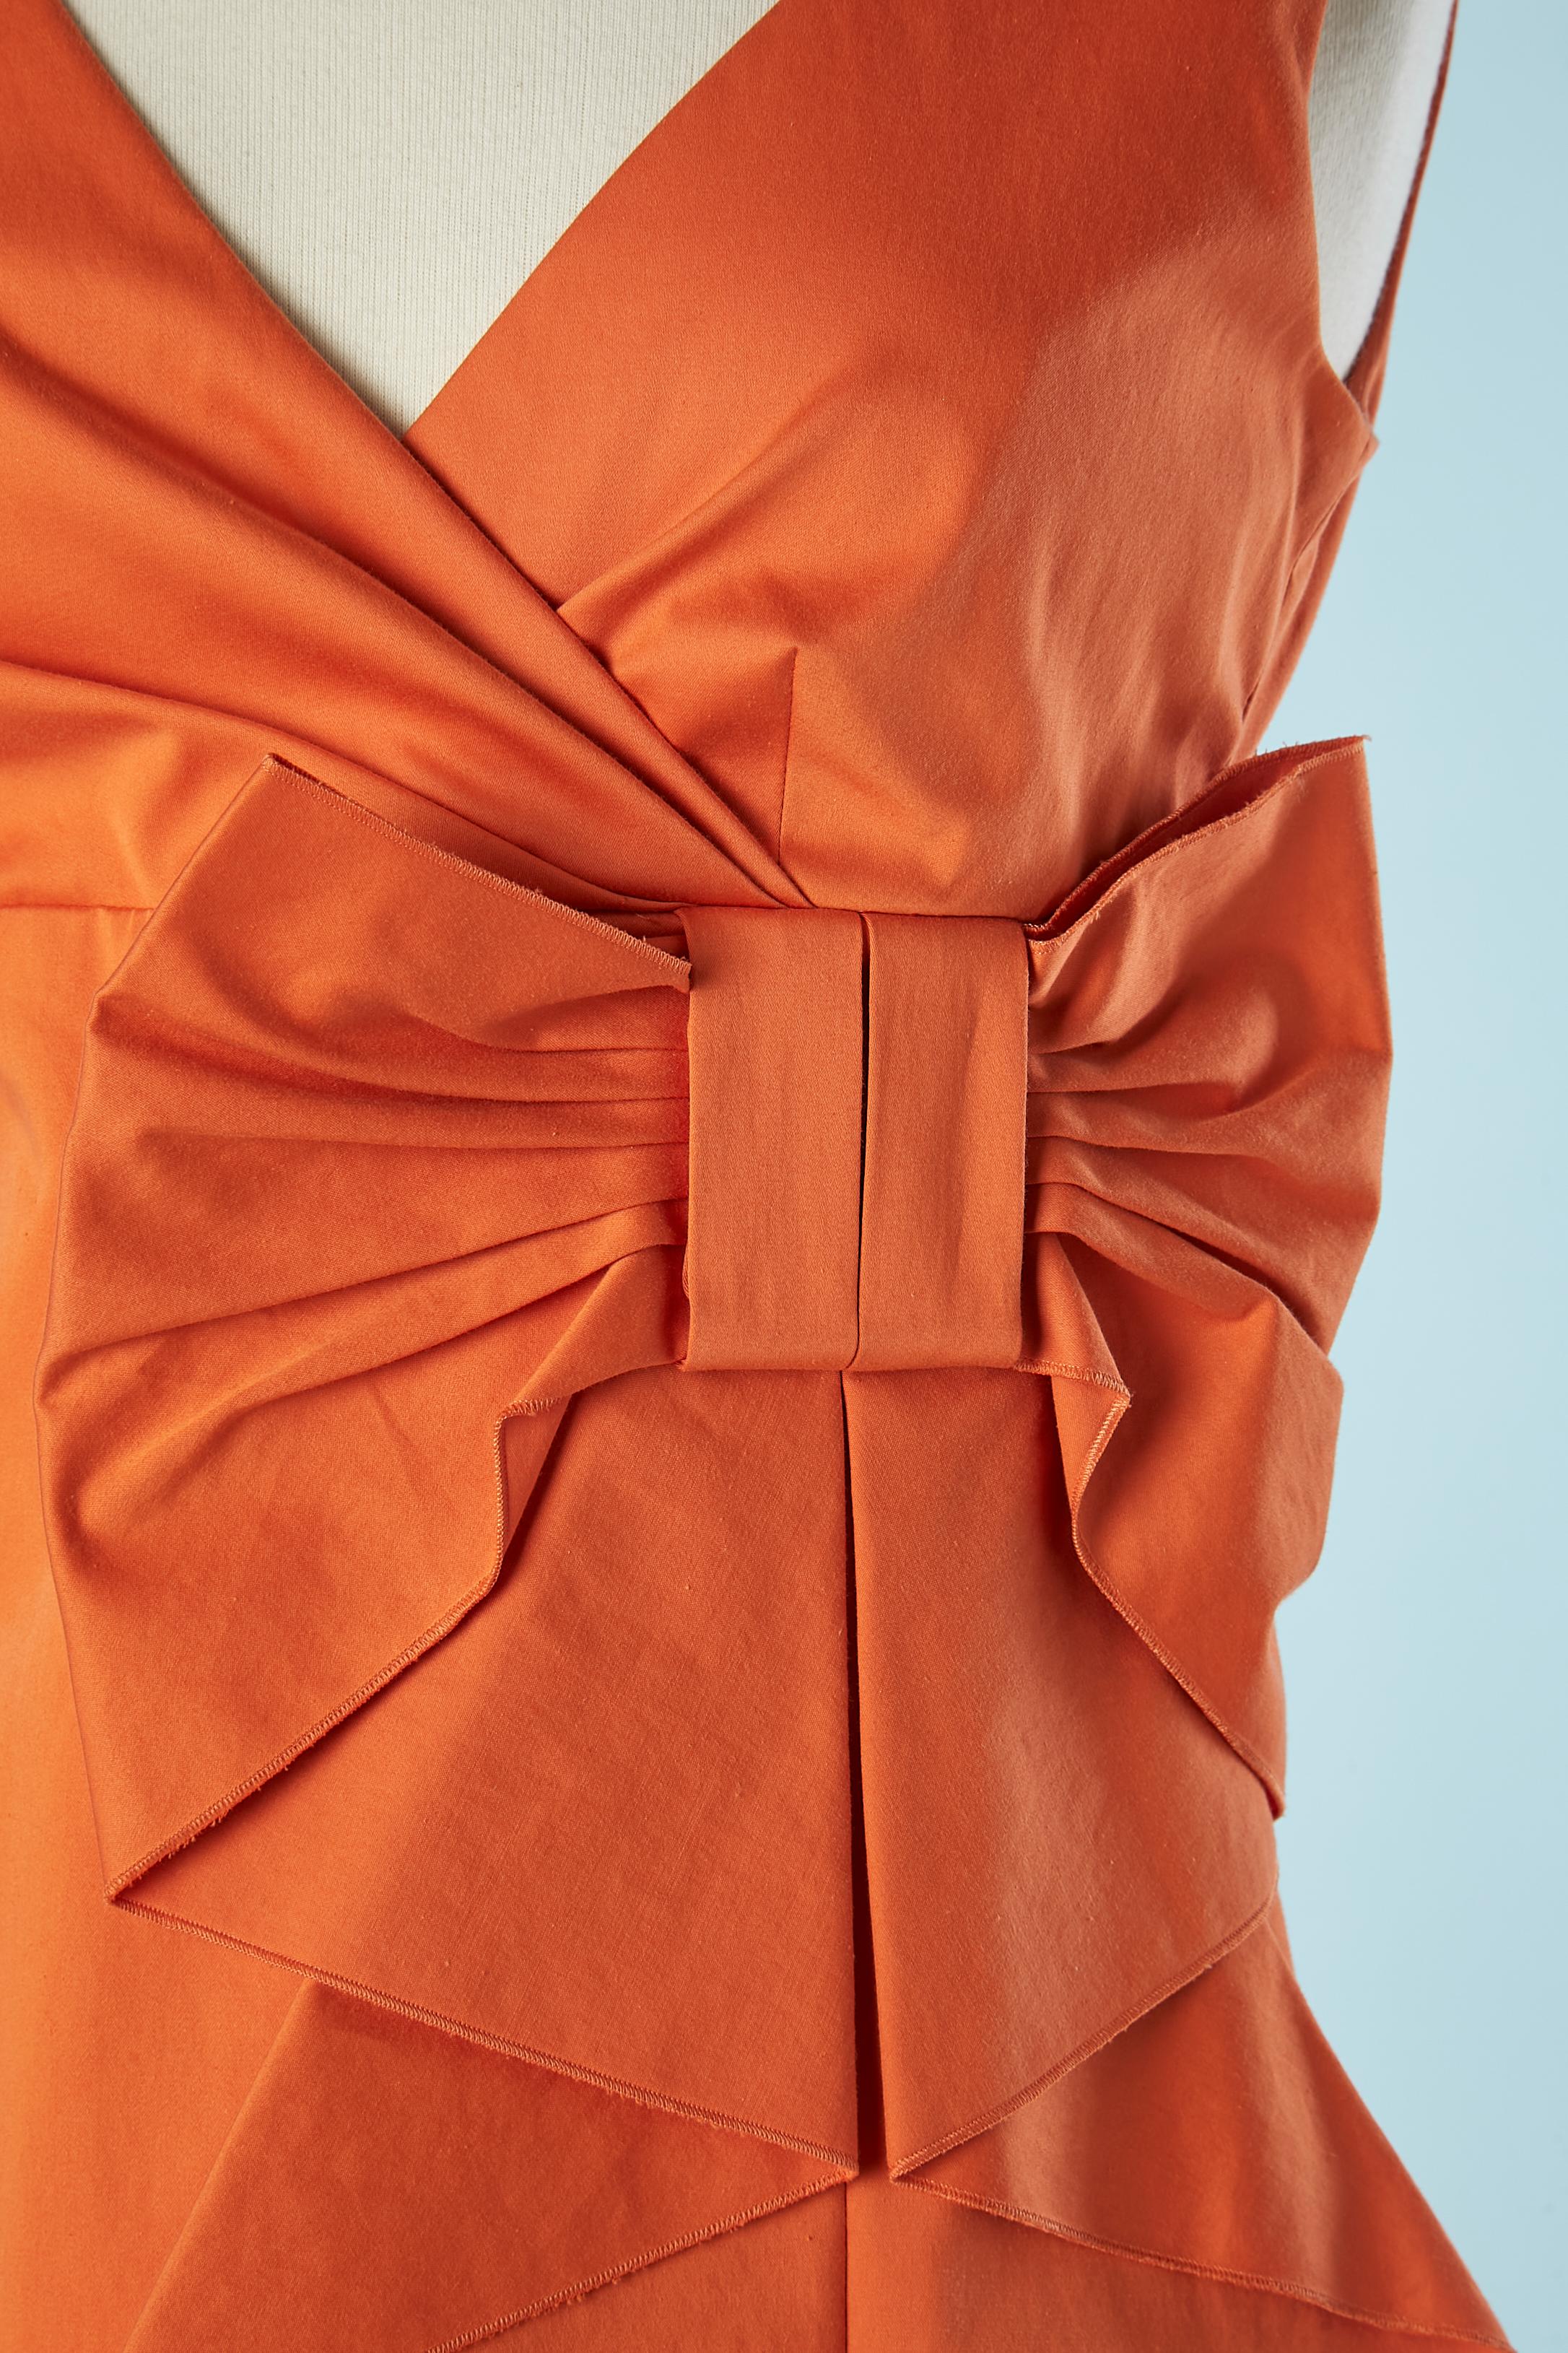 Orange cotton cocktail dress with bow. Fabric composition: 97% cotton, 3% elastane.
Lining: 67% acetate 33% polyester. 
Ruffle in the middle front. Split on the front on the side, lenght= 18 cm
SIZE 40 NEW with tag